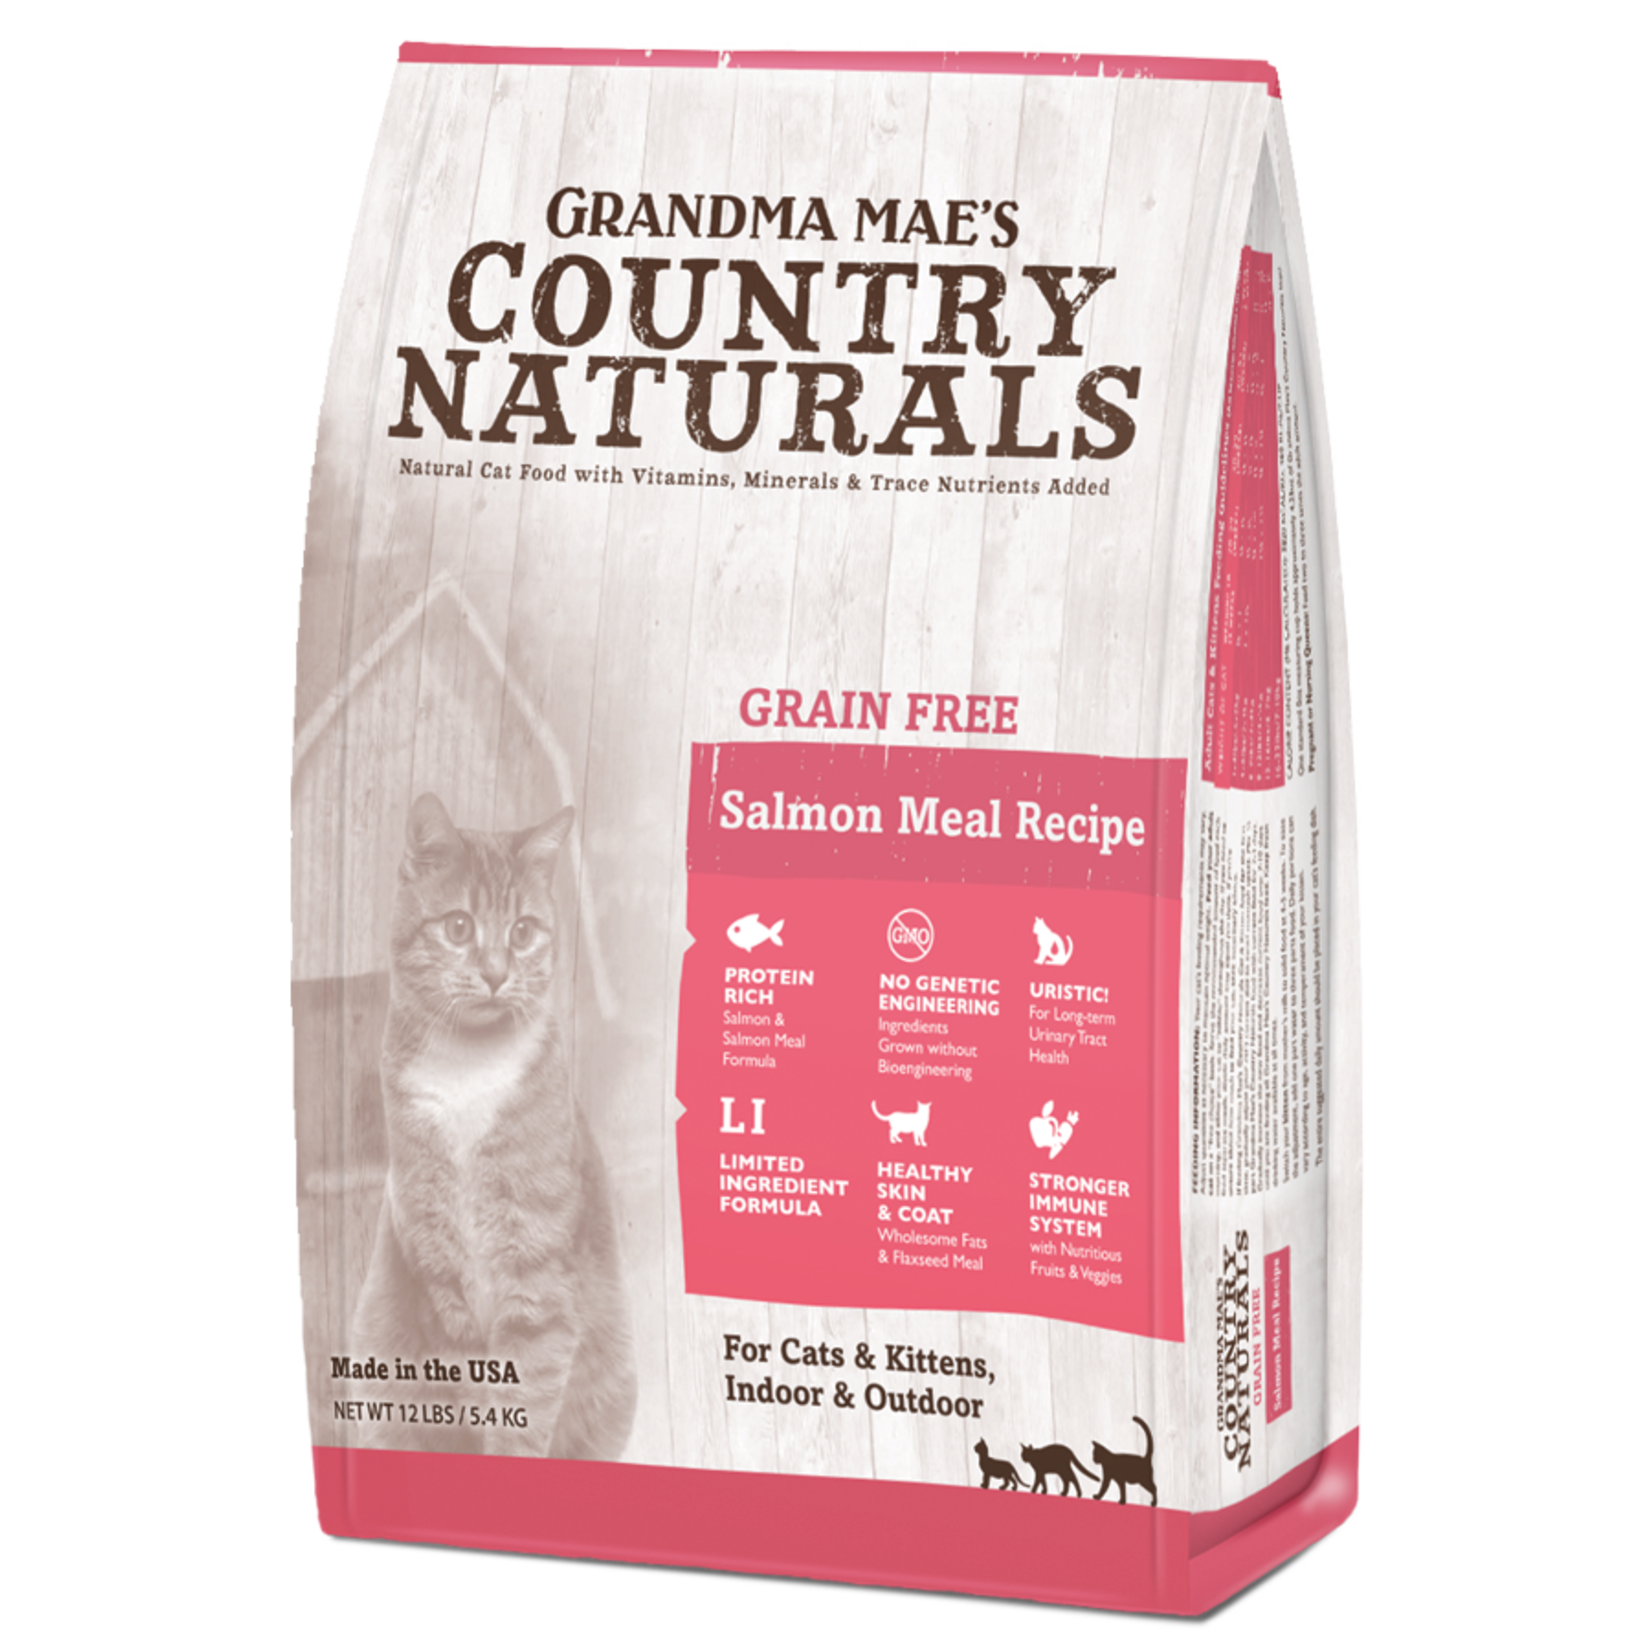 Grandma Maes Country Naturals Grandma Mae's Country Naturals Dry Cat Food Salmon Meal Recipe for Cats and Kittens Grain Free